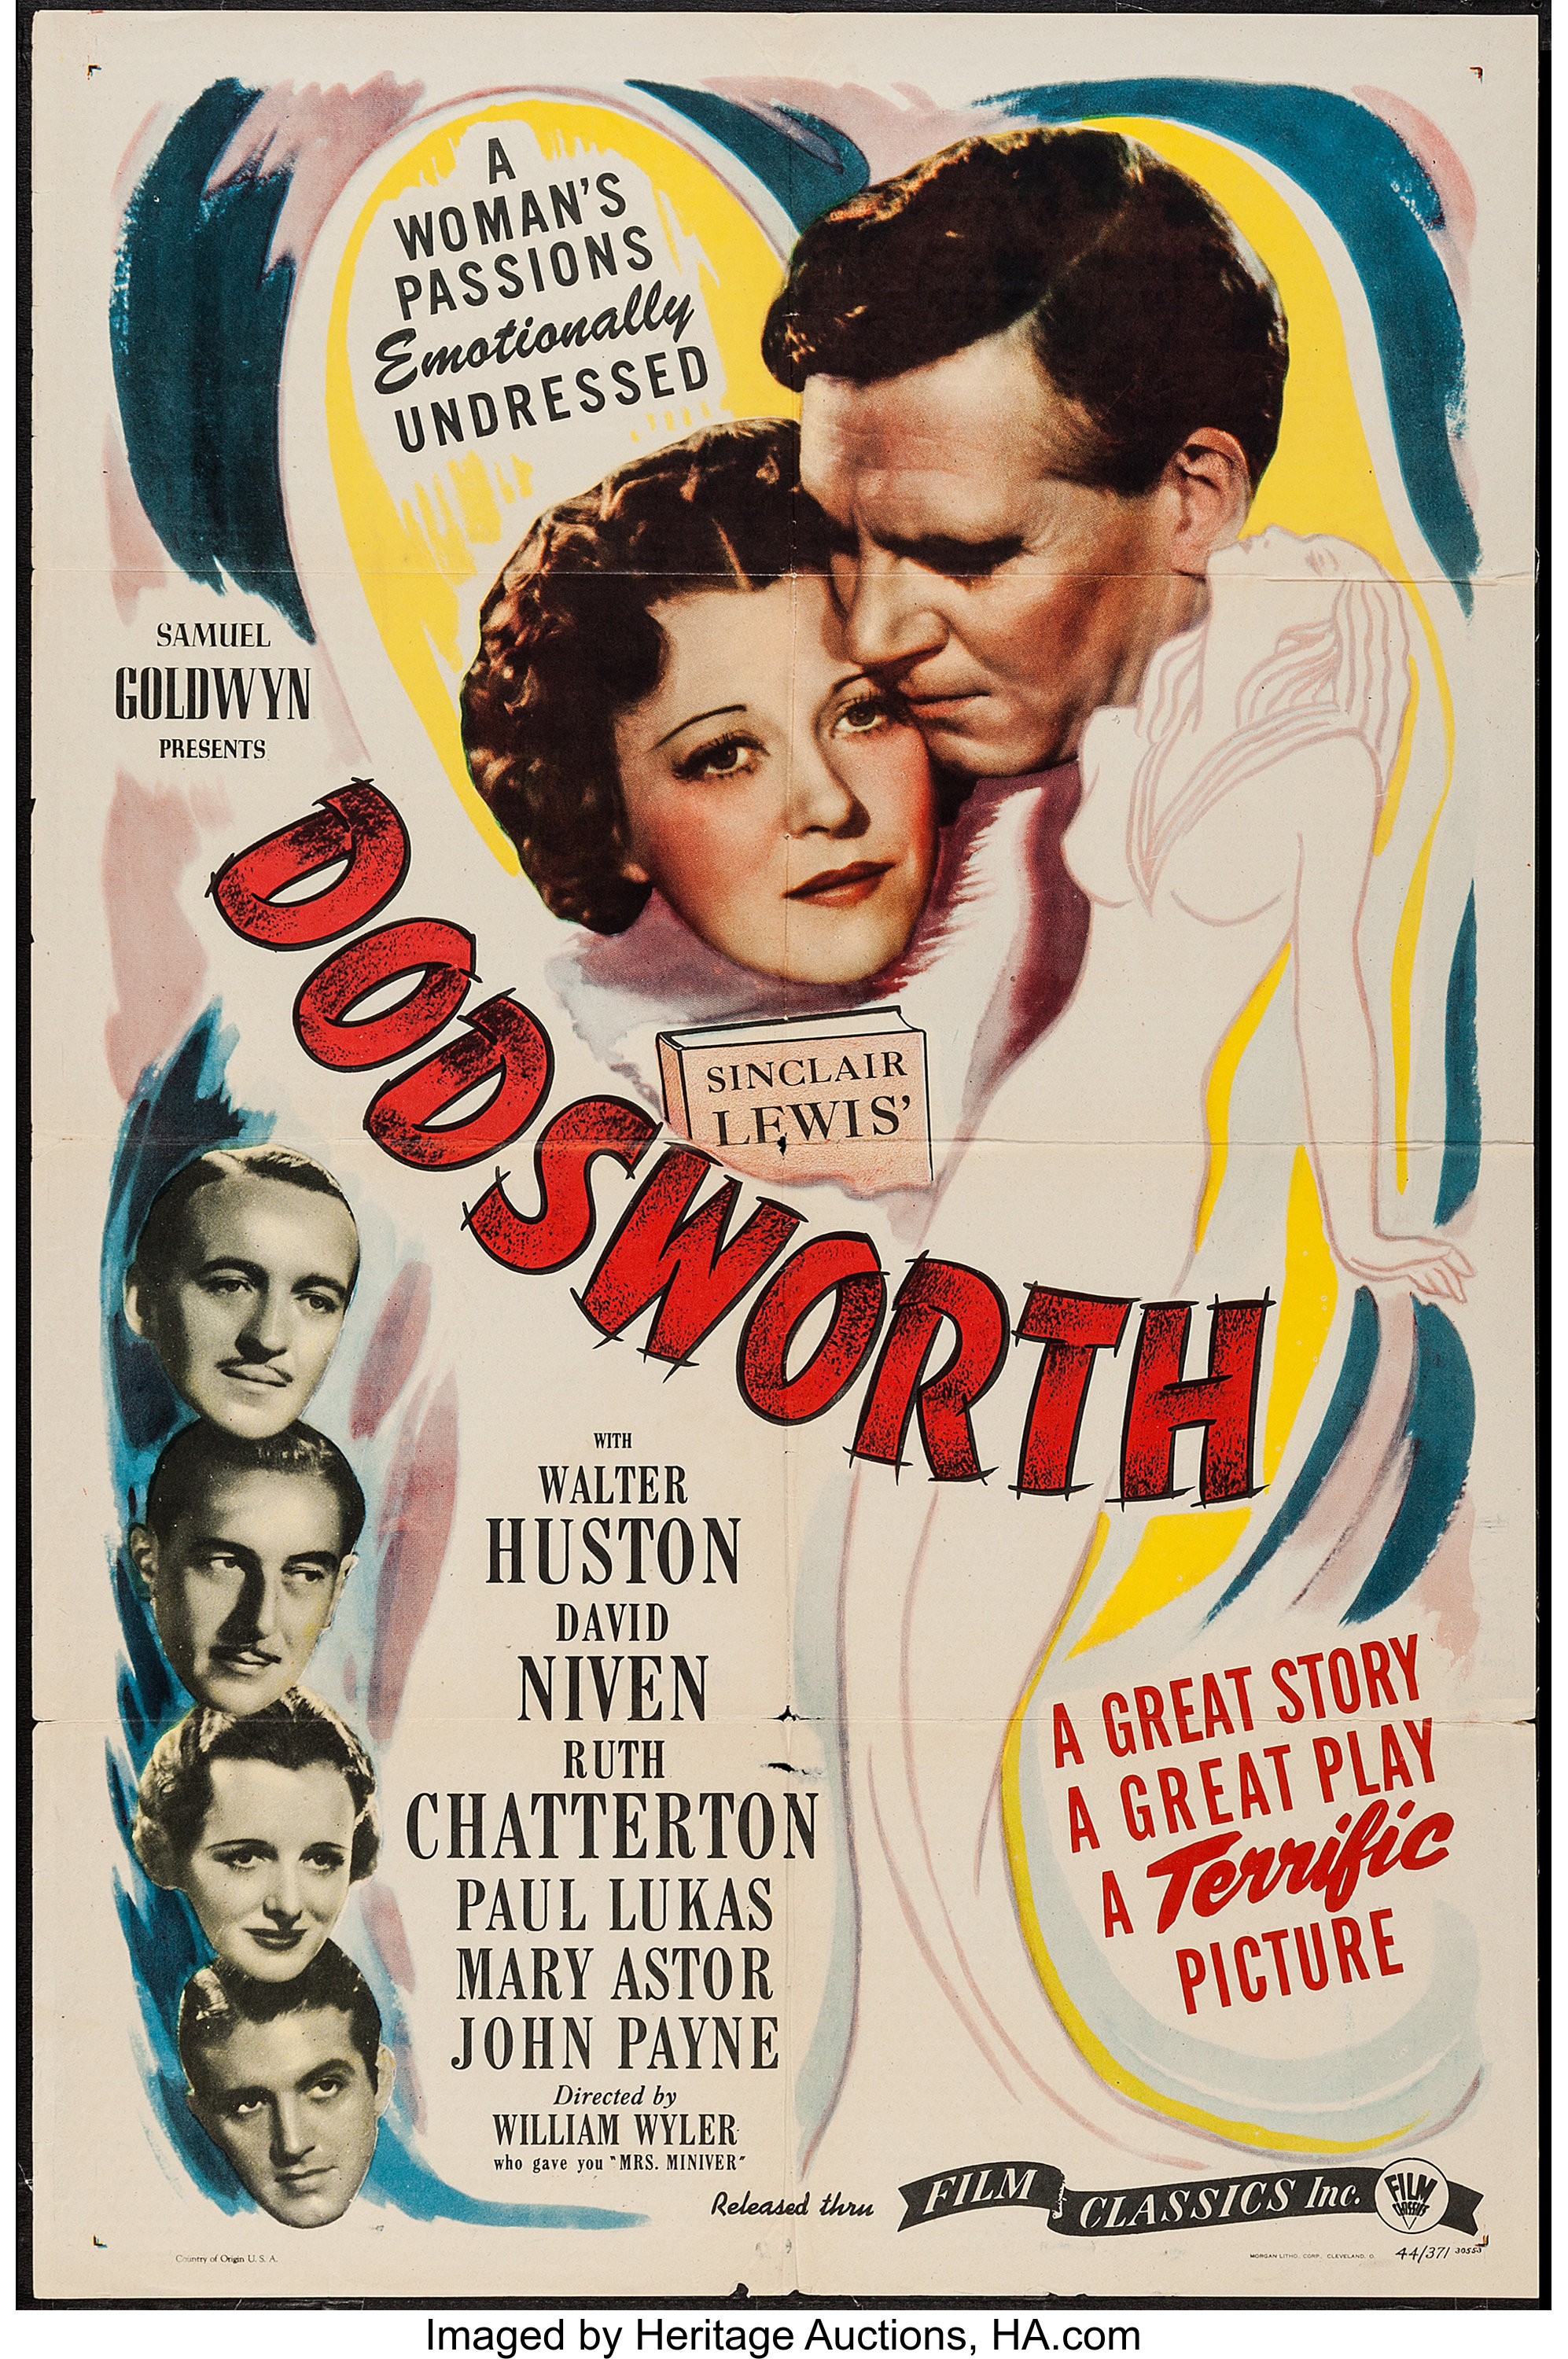 Dodsworth written out in red with two people in the background with faces touching. 